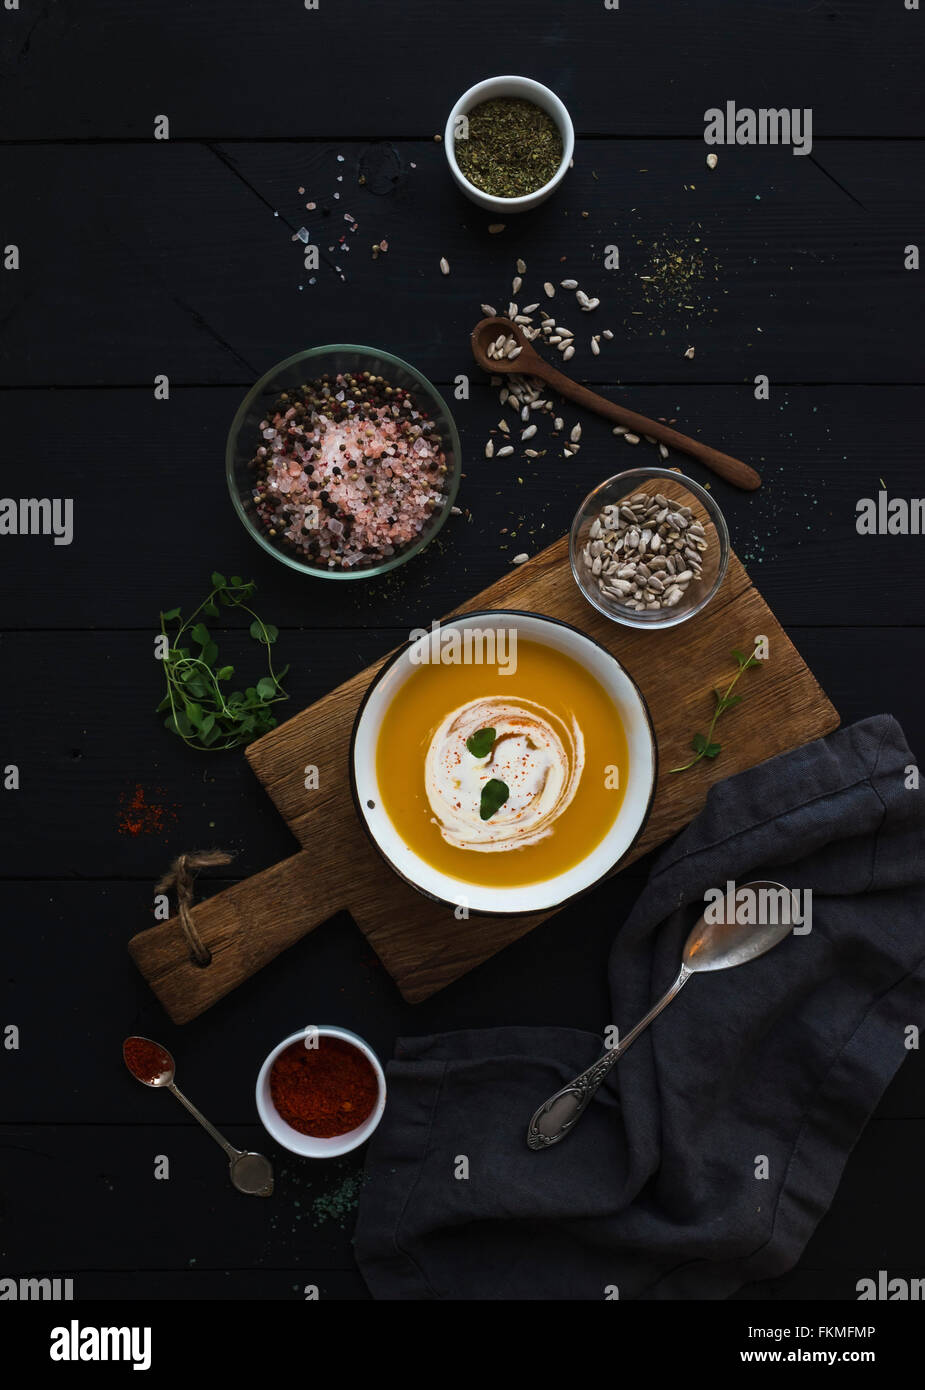 Pumpkin soup with cream, seeds and spices in rustic metal bowl on wooden board over grunge black background. Top view Stock Photo